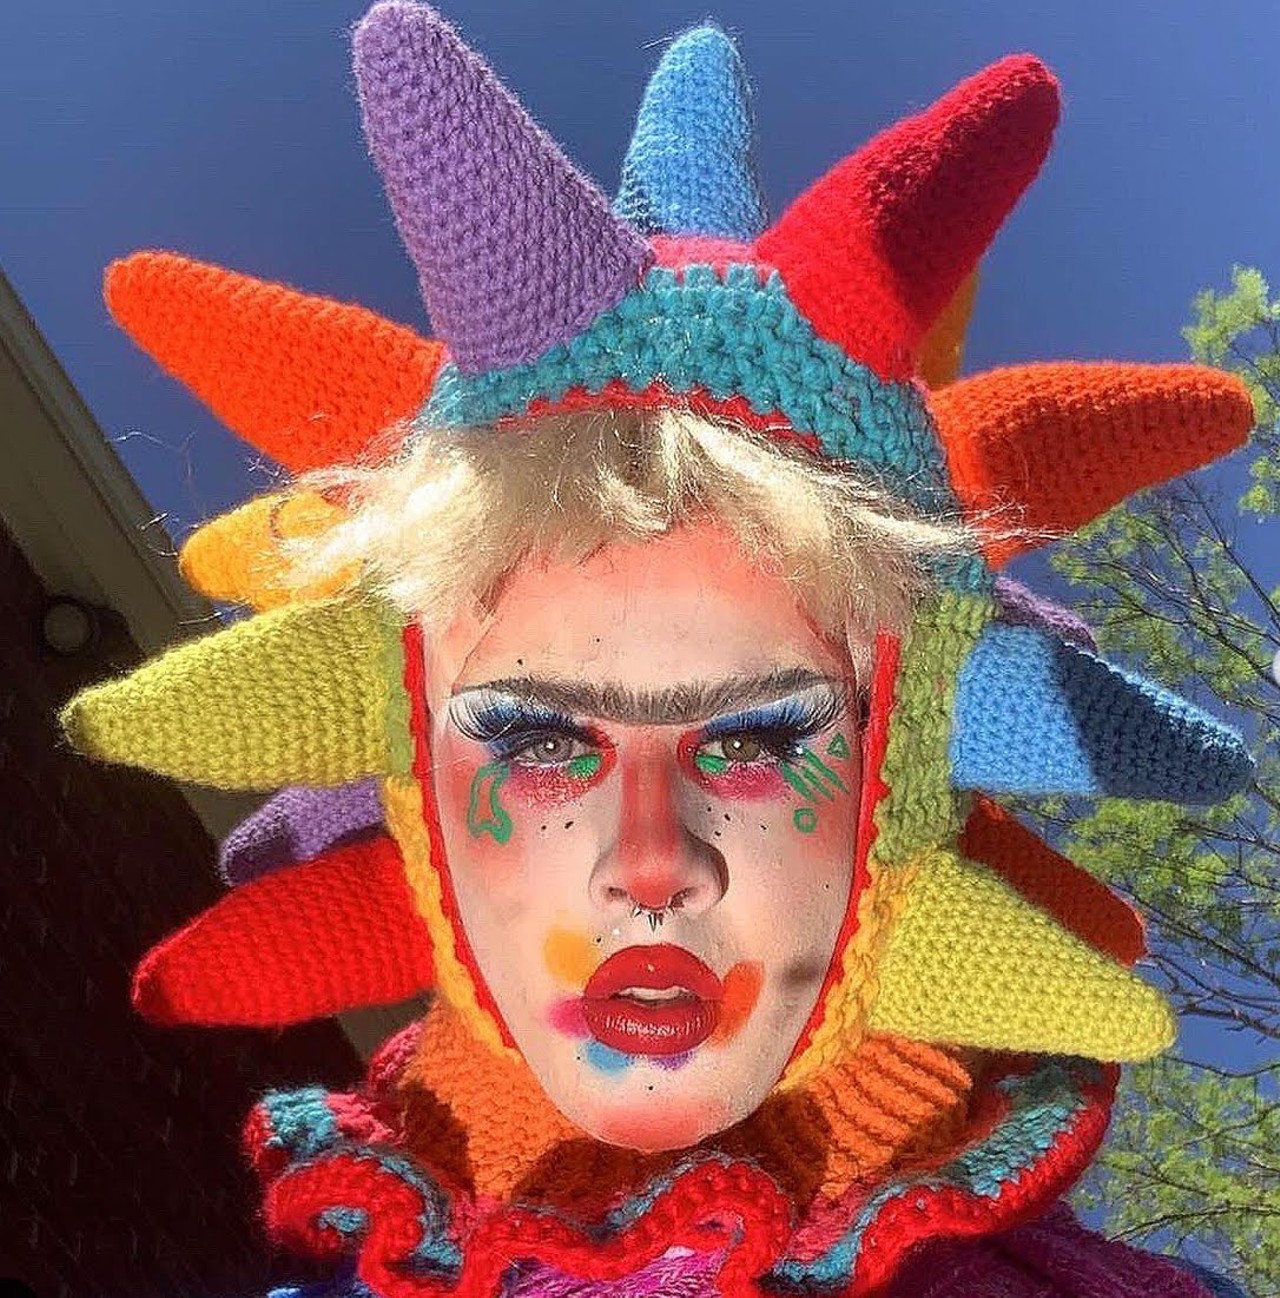 Spïne (@spinedrag) 
Spïne’s Instagram feed is never boring. This Detroit queen’s colorful, wacky, and sometimes just plain weird makeup looks are always fun to look at.
Photo by Spïne (@spinedrag)